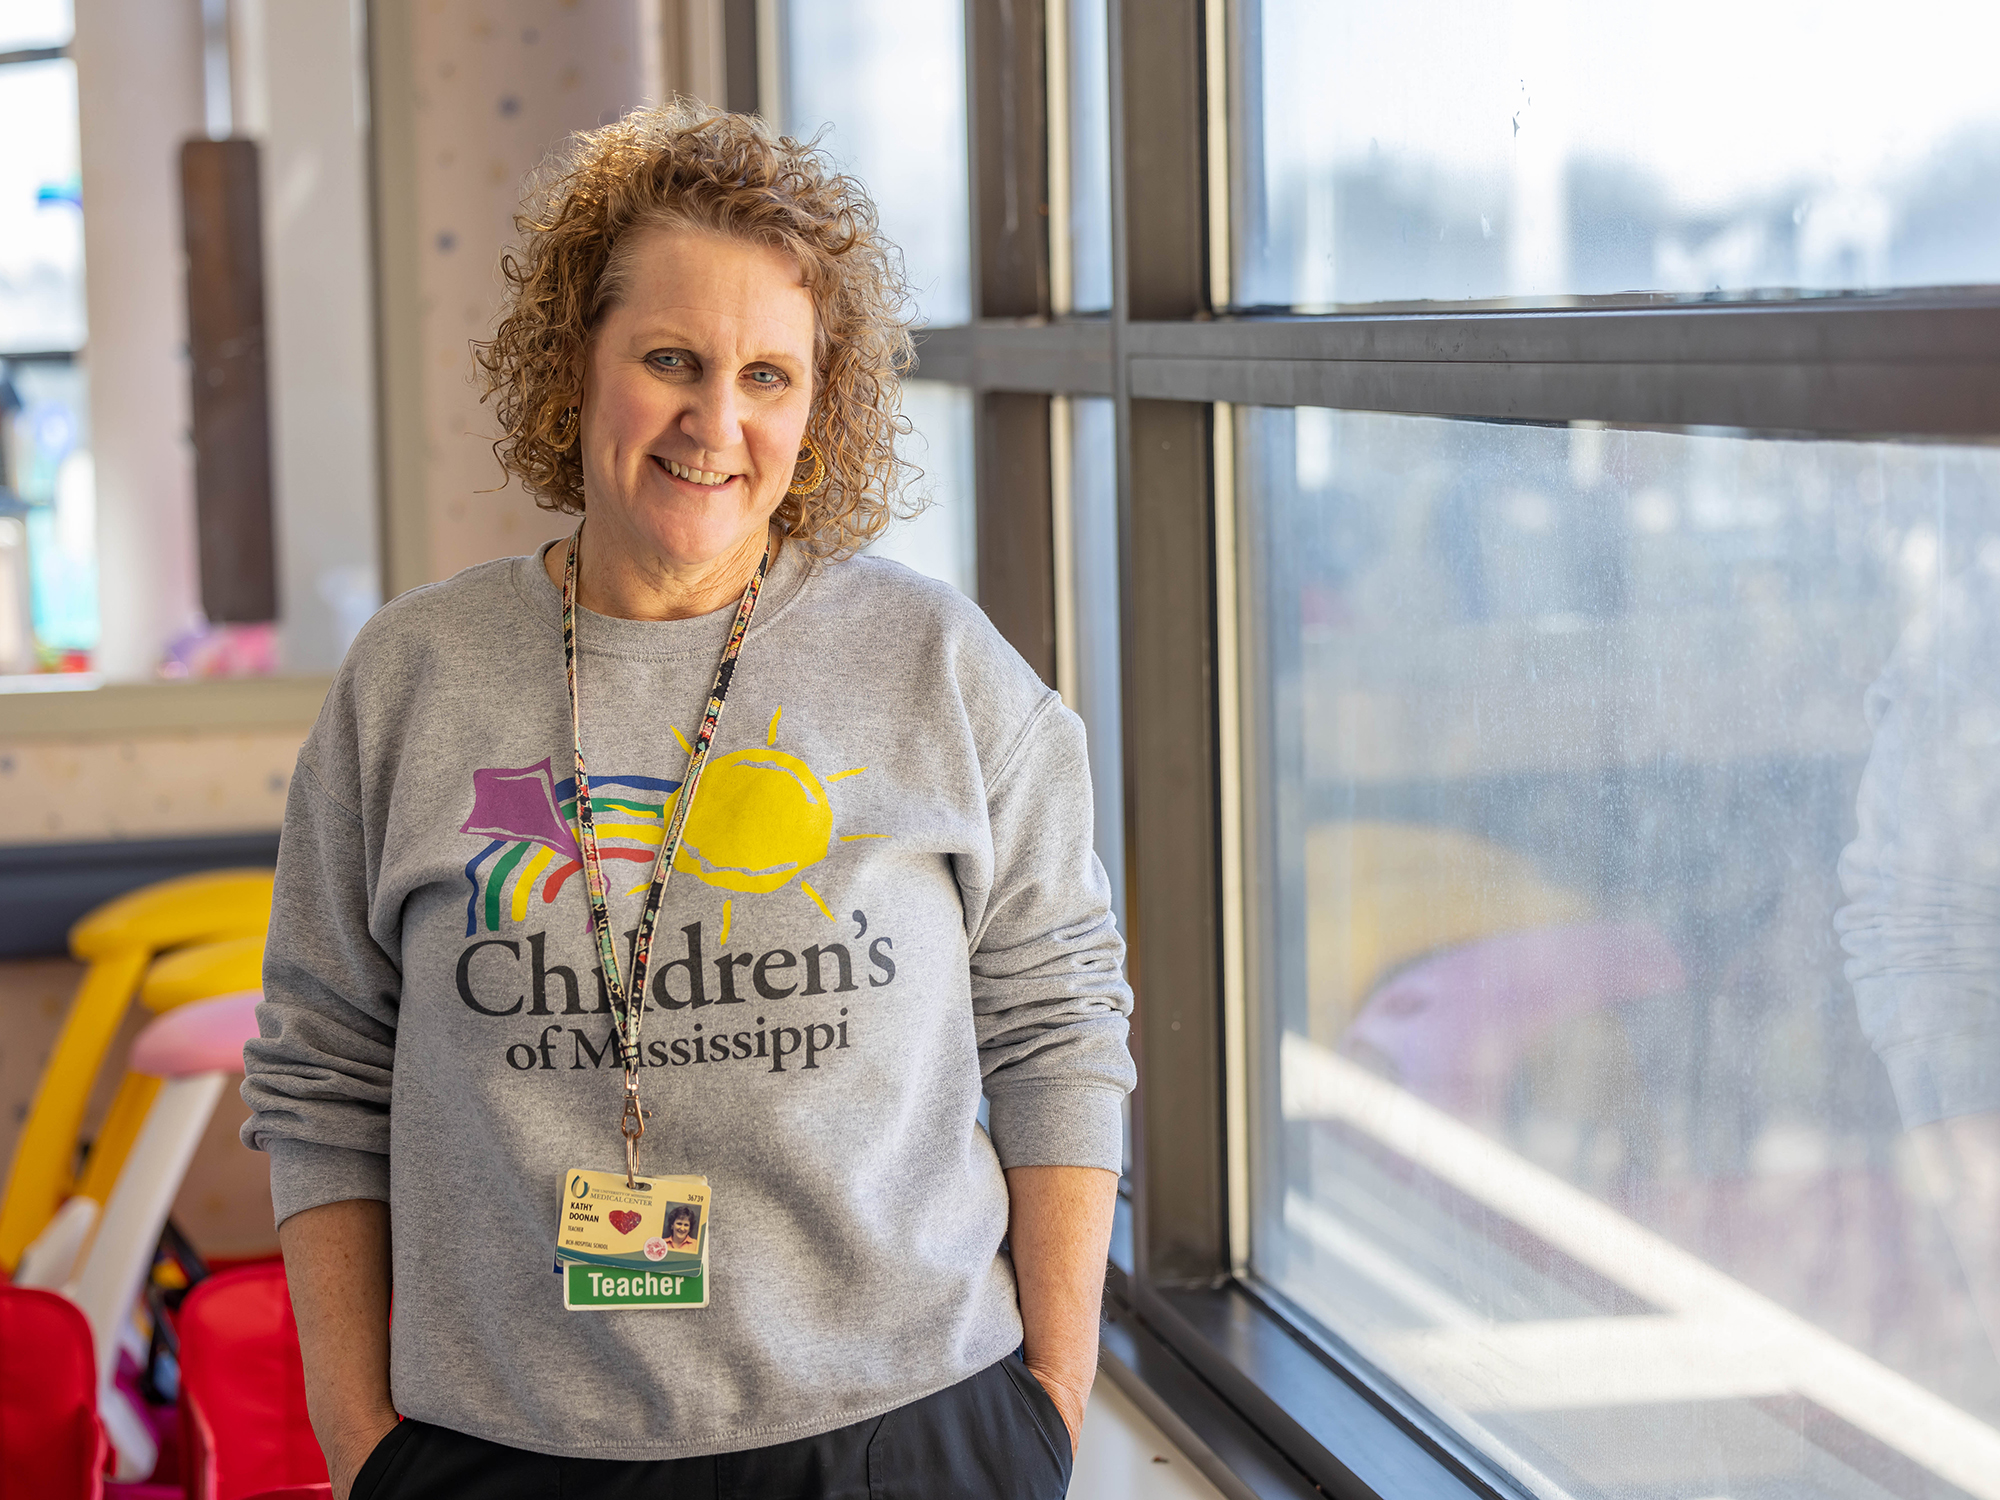 Kathy Doonan, a 30-year teacher at Children's of Mississippi, has taught in the children's hospitals three towers, the circle tower, Batson and Sanderson.